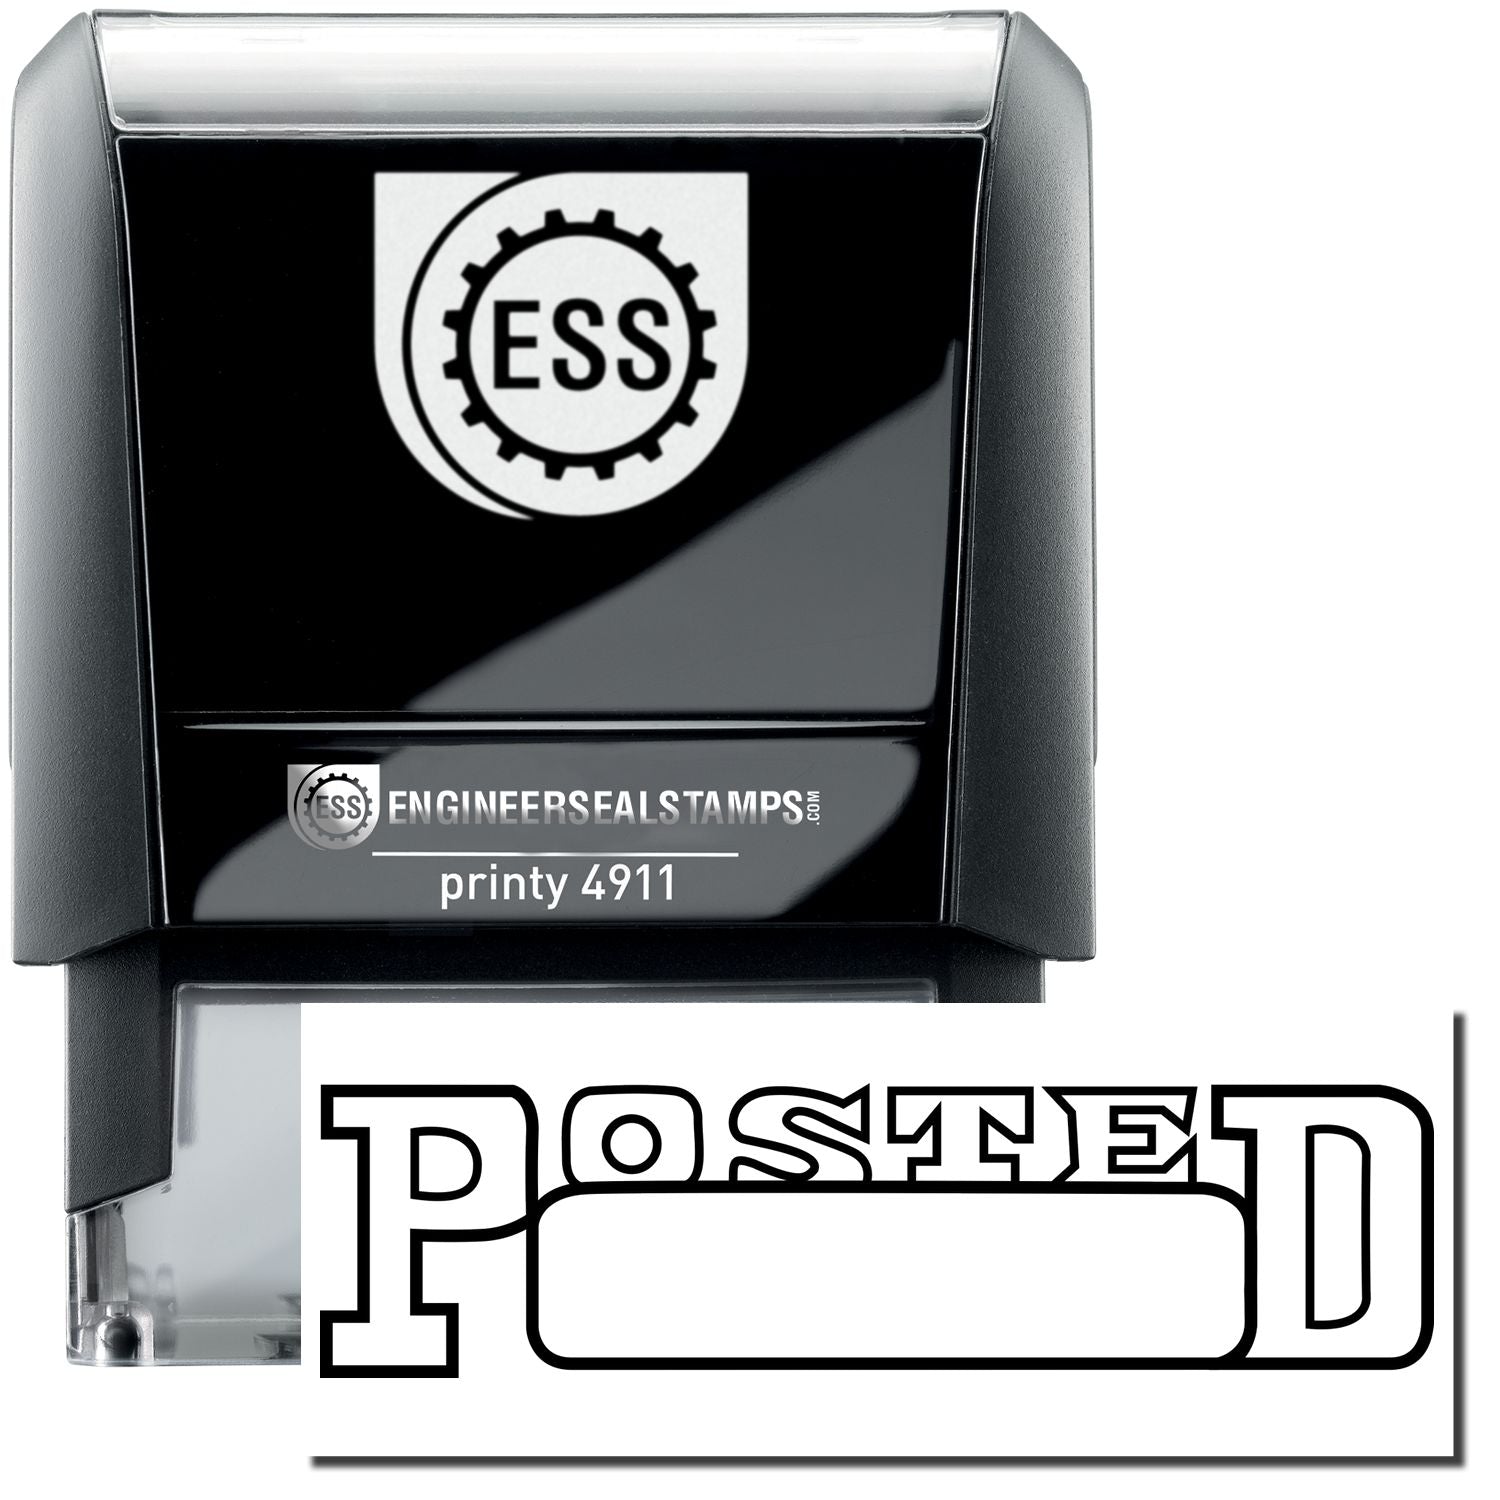 A self-inking stamp with a stamped image showing how the text "POSTED" with a date box under it is displayed after stamping.